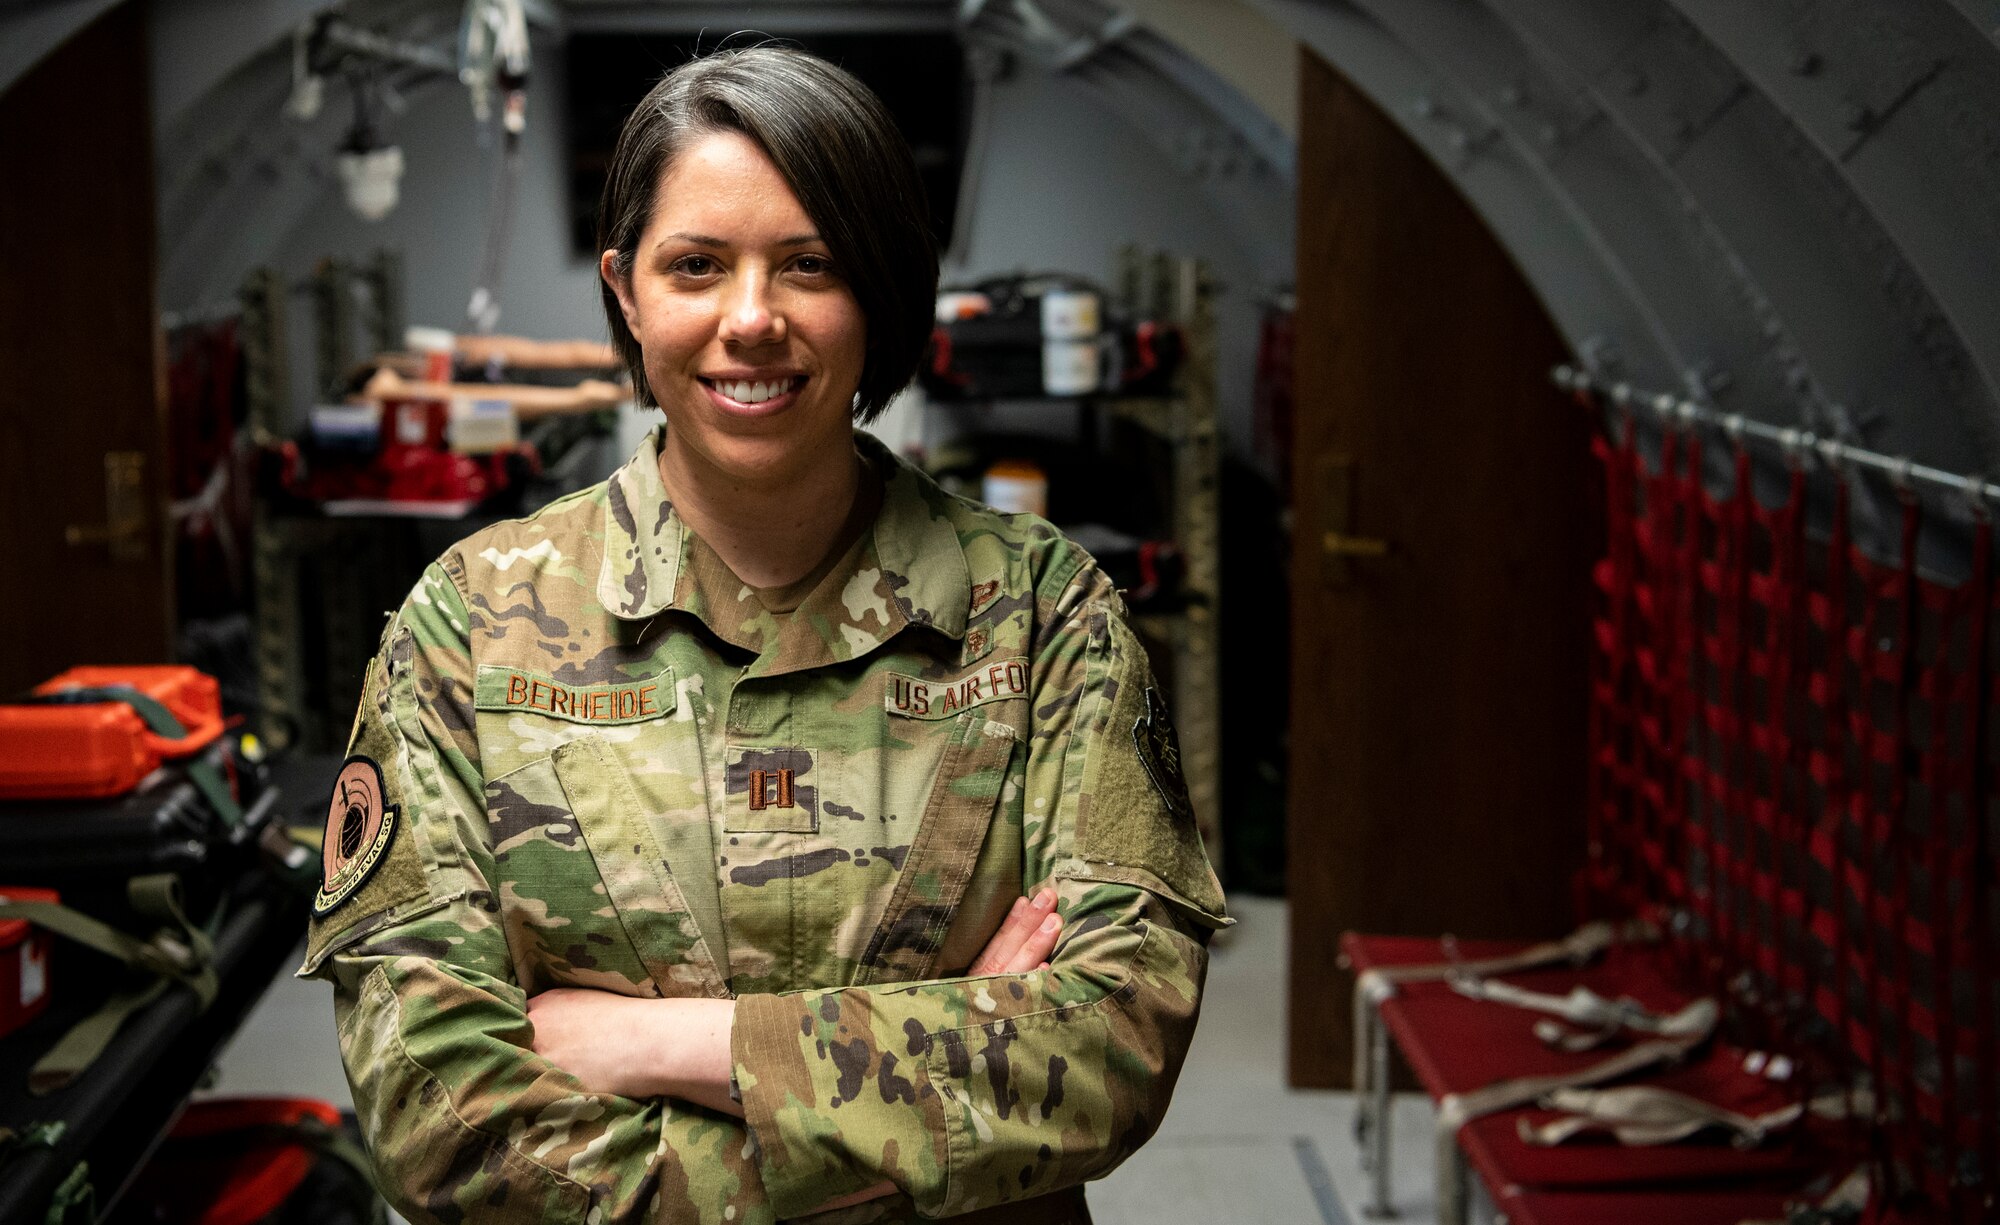 U.S. Air Force Capt. Sarah Berheide, 375th Aeromedical Evacuation Squadron operations support flight commander, stands in a training room at the 375th AES, March 3, 2022 at Scott Air Force Base, Illinois. Berheide is part of the 2019 Women's Initiative Team that brought change to policy for female hair and uniform regulations. (U.S. Air Force photo by Staff Sgt. Solomon Cook)